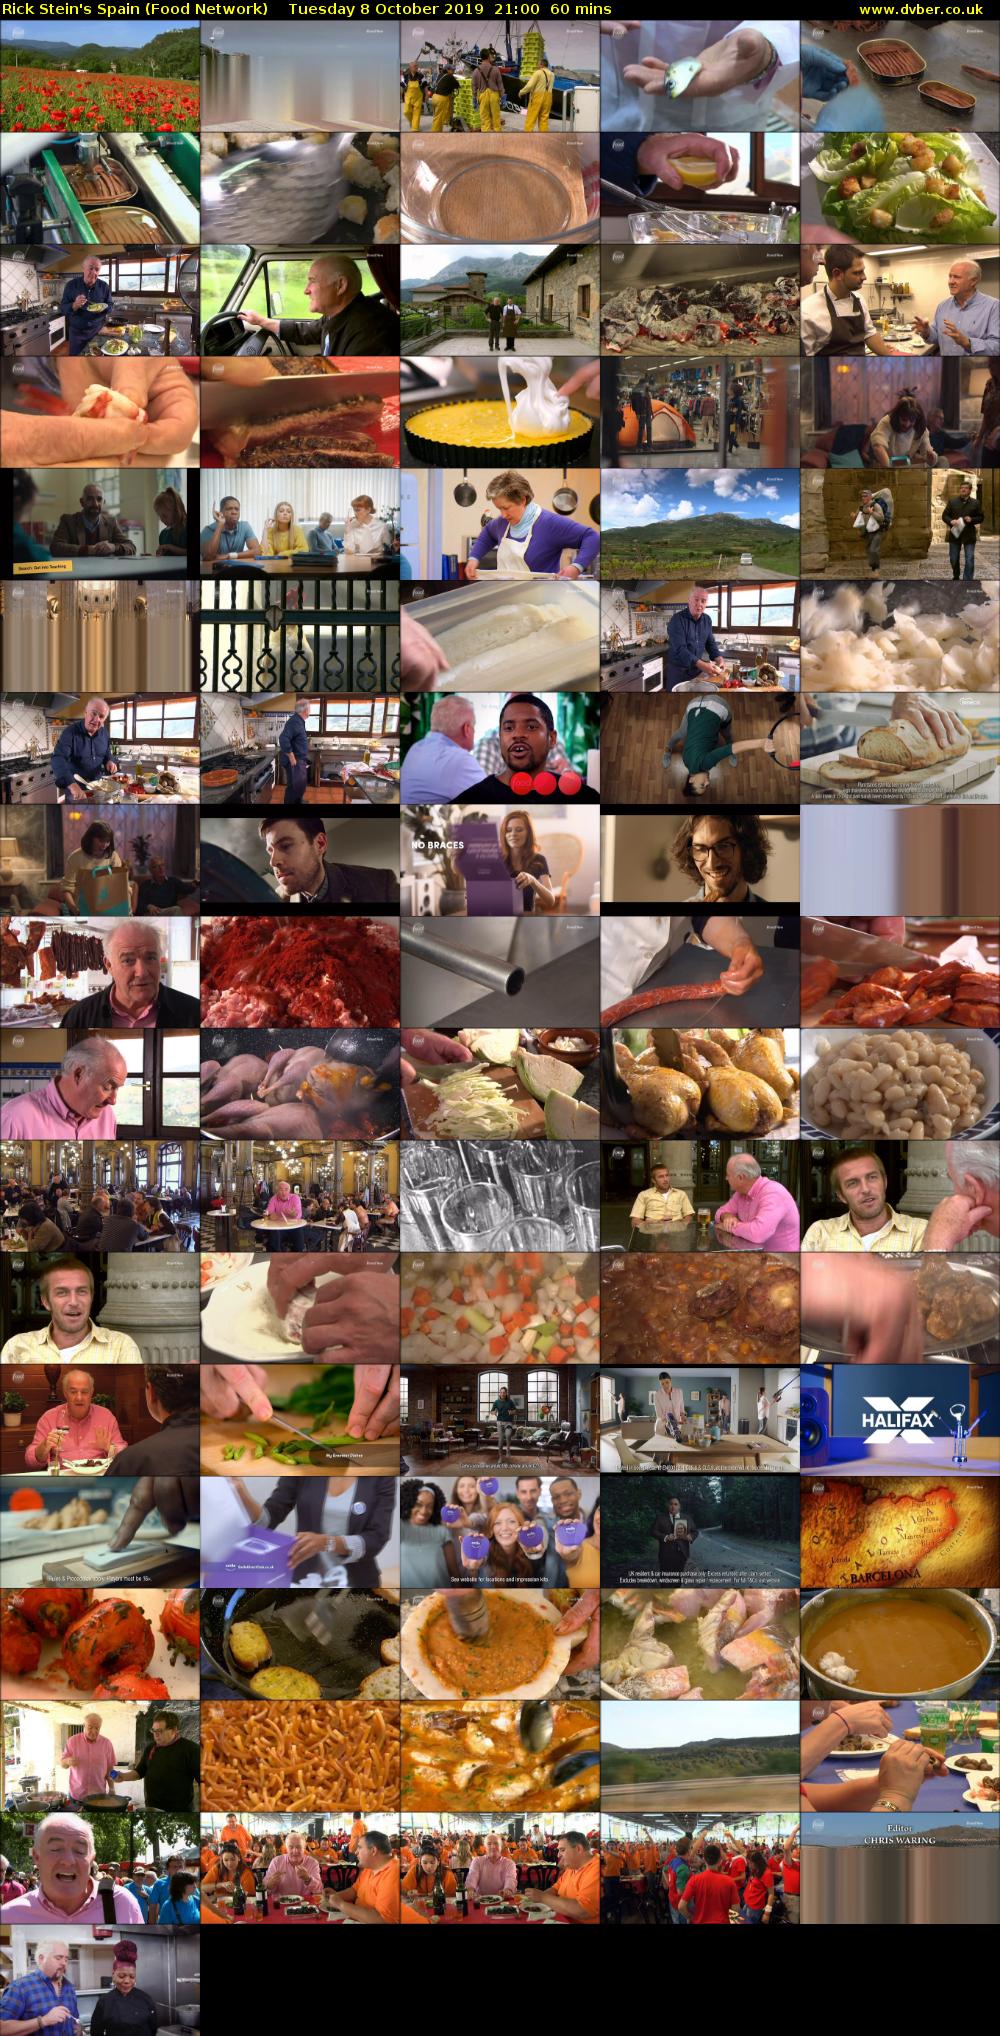 Rick Stein's Spain (Food Network) Tuesday 8 October 2019 21:00 - 22:00